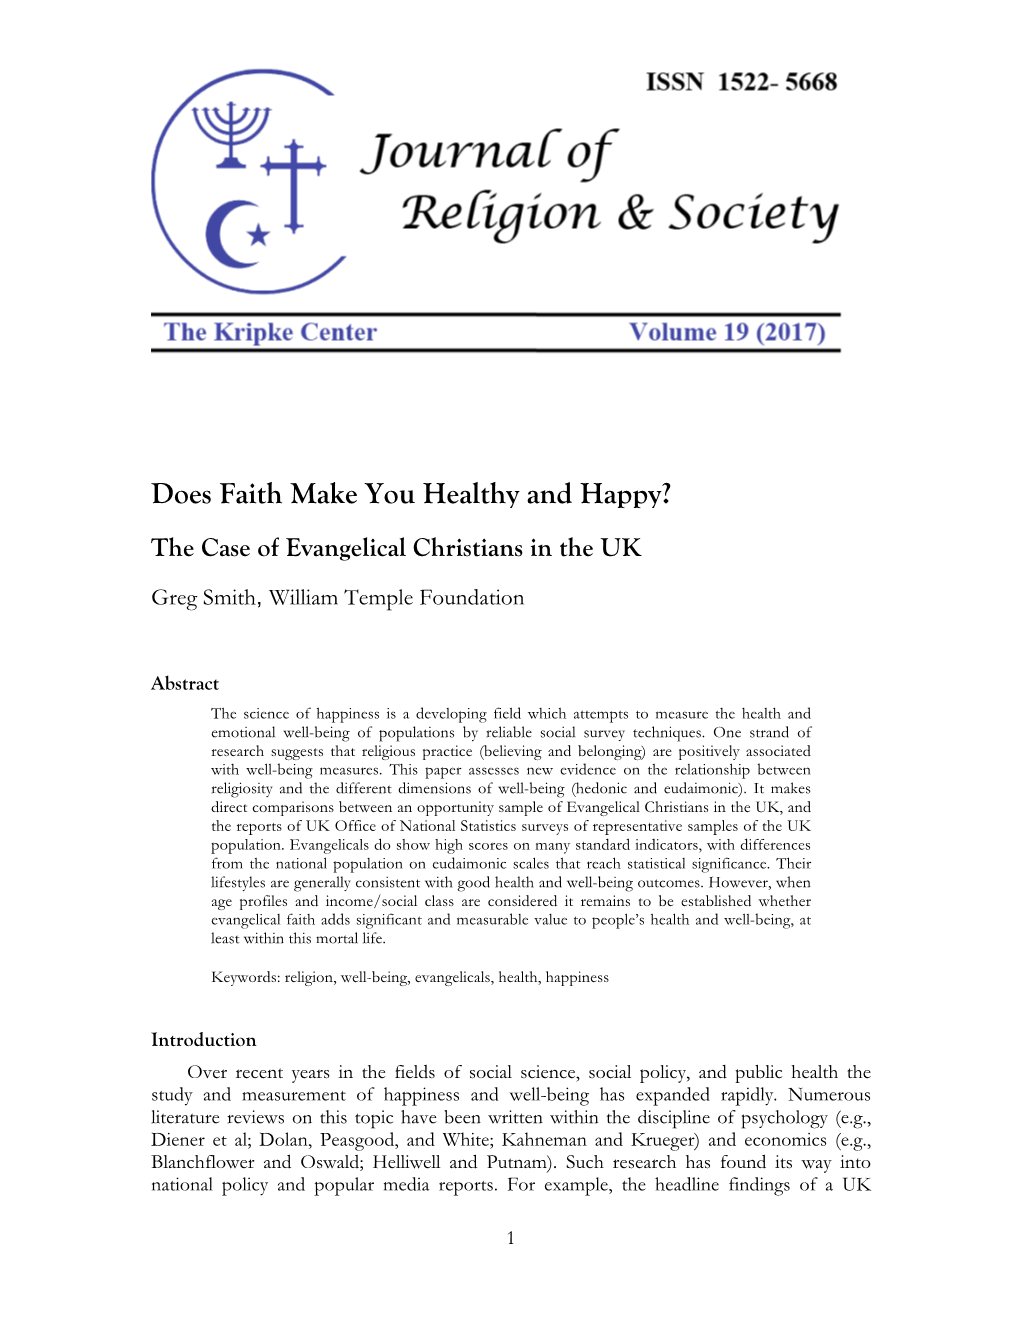 Does Faith Make You Healthy and Happy? the Case of Evangelical Christians in the UK